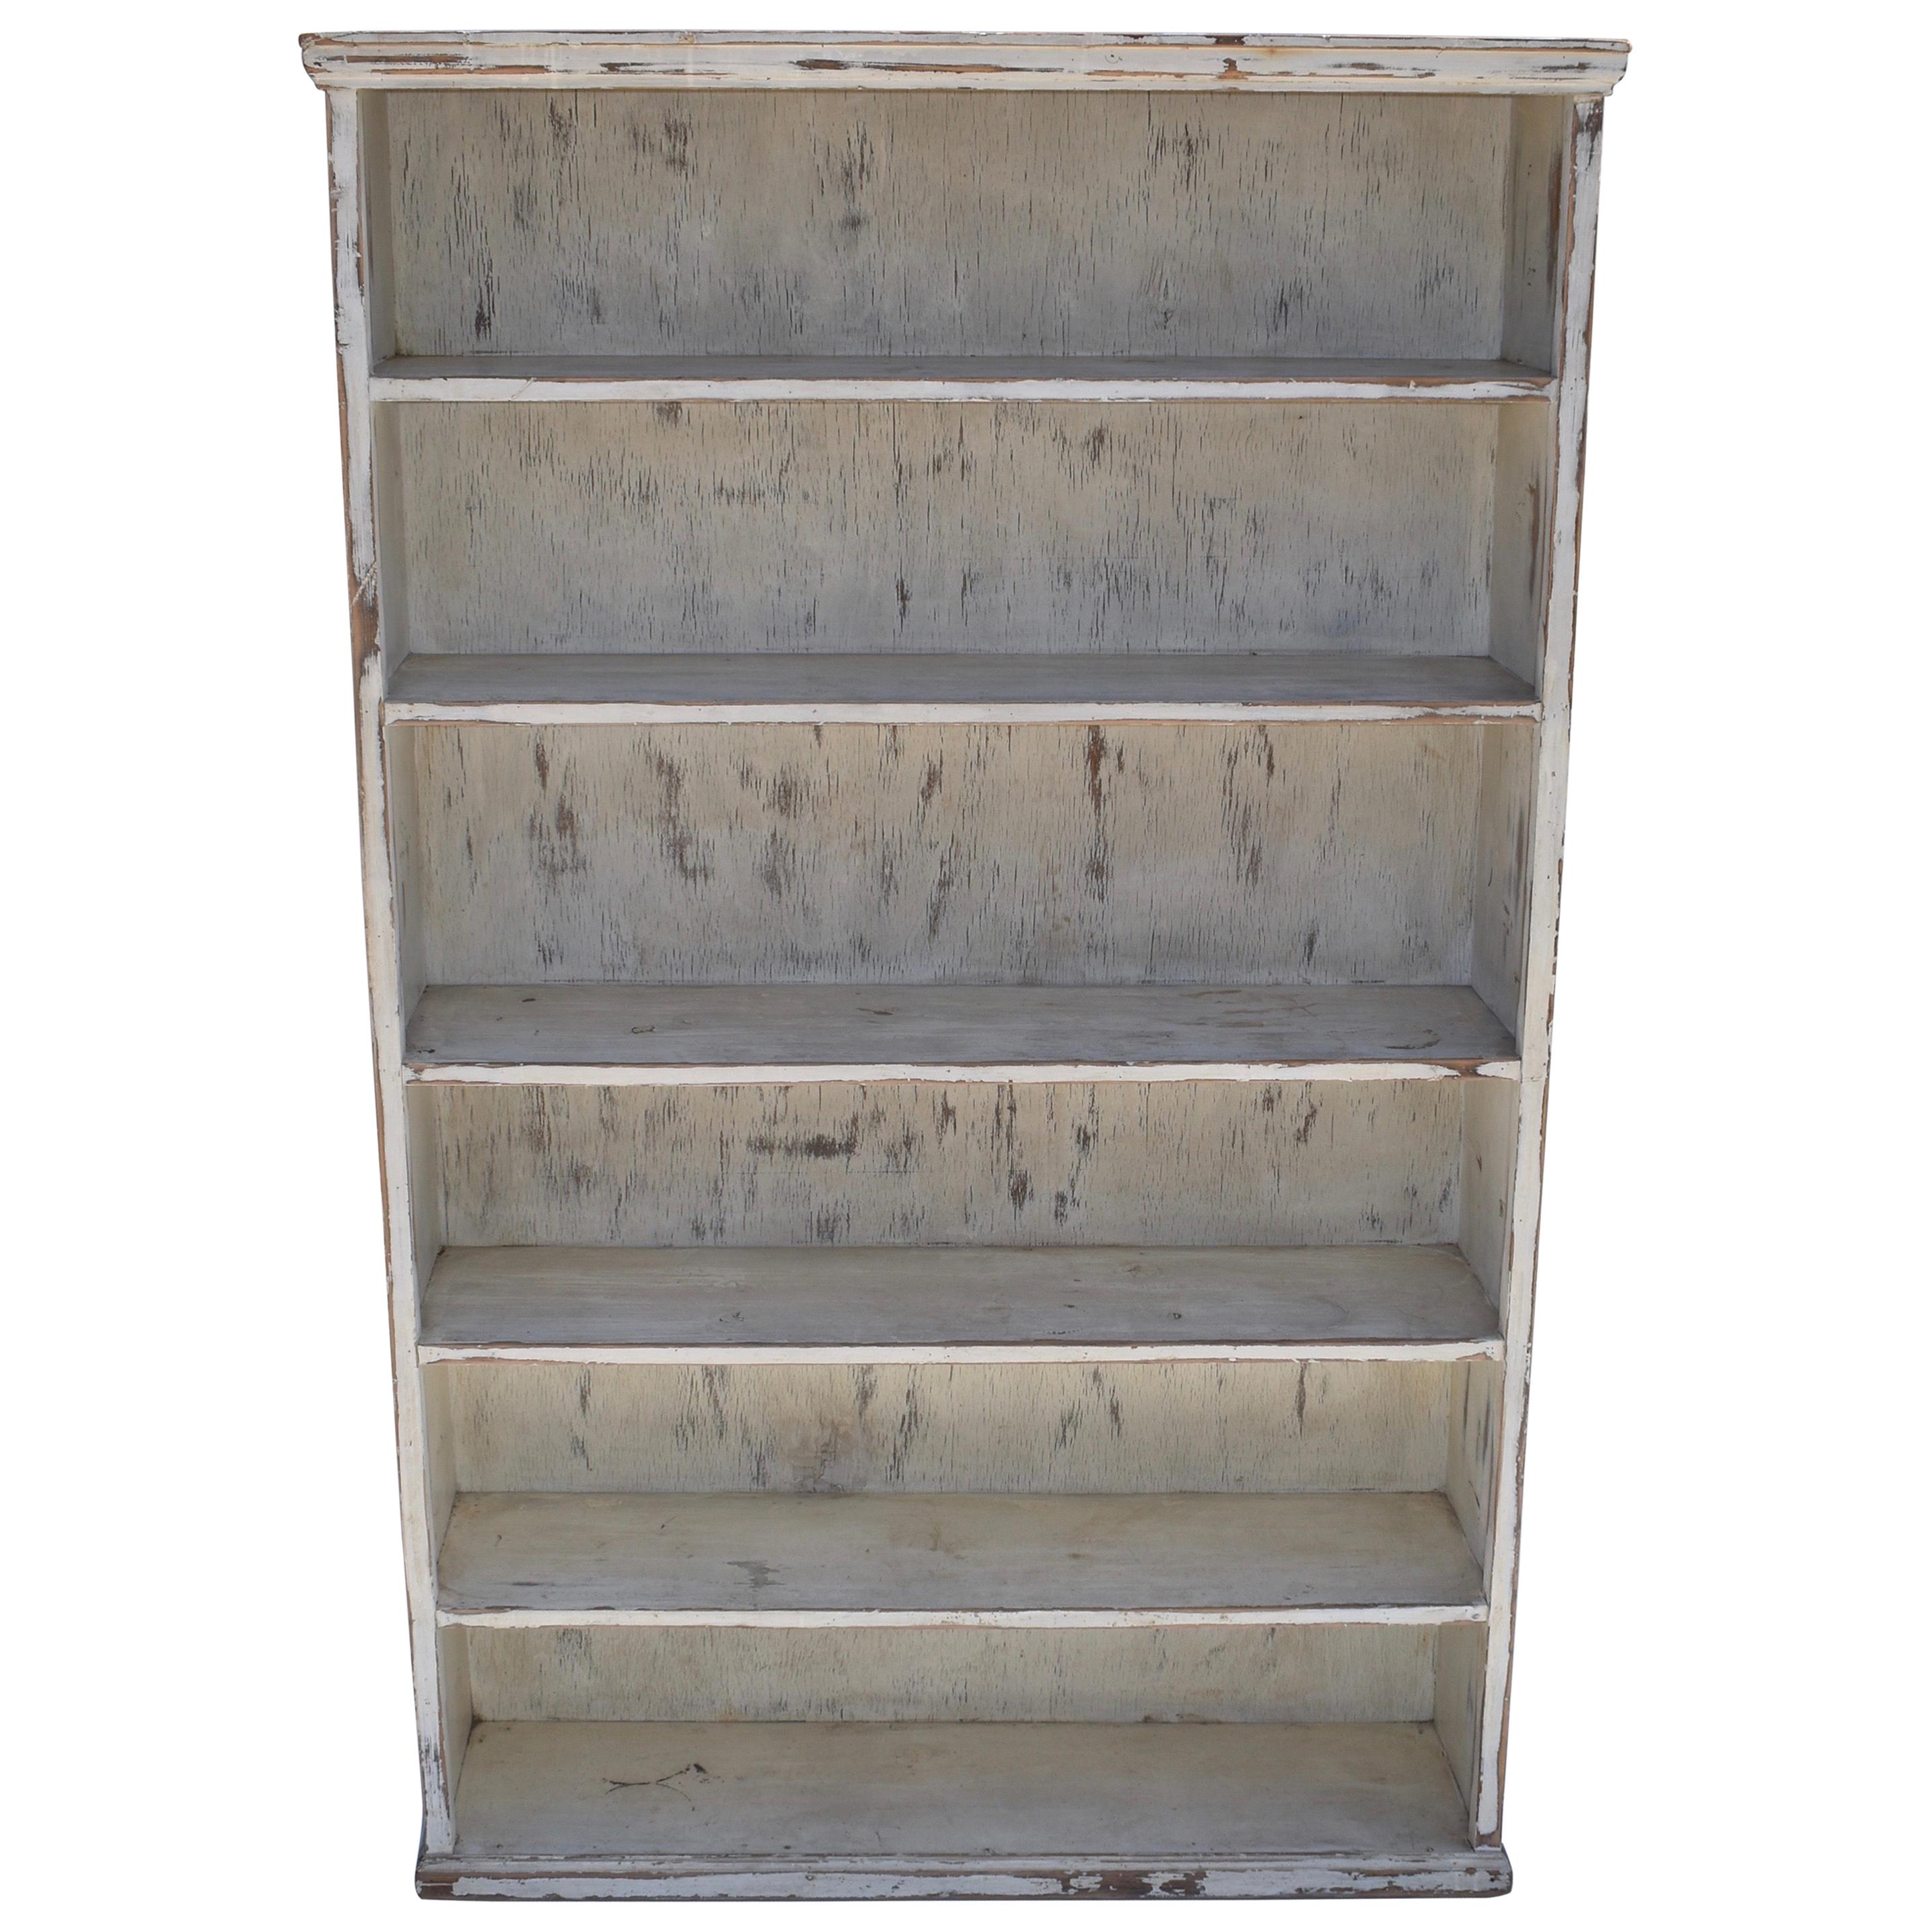 Vintage Painted Pine Pantry or Utility Shelves For Sale